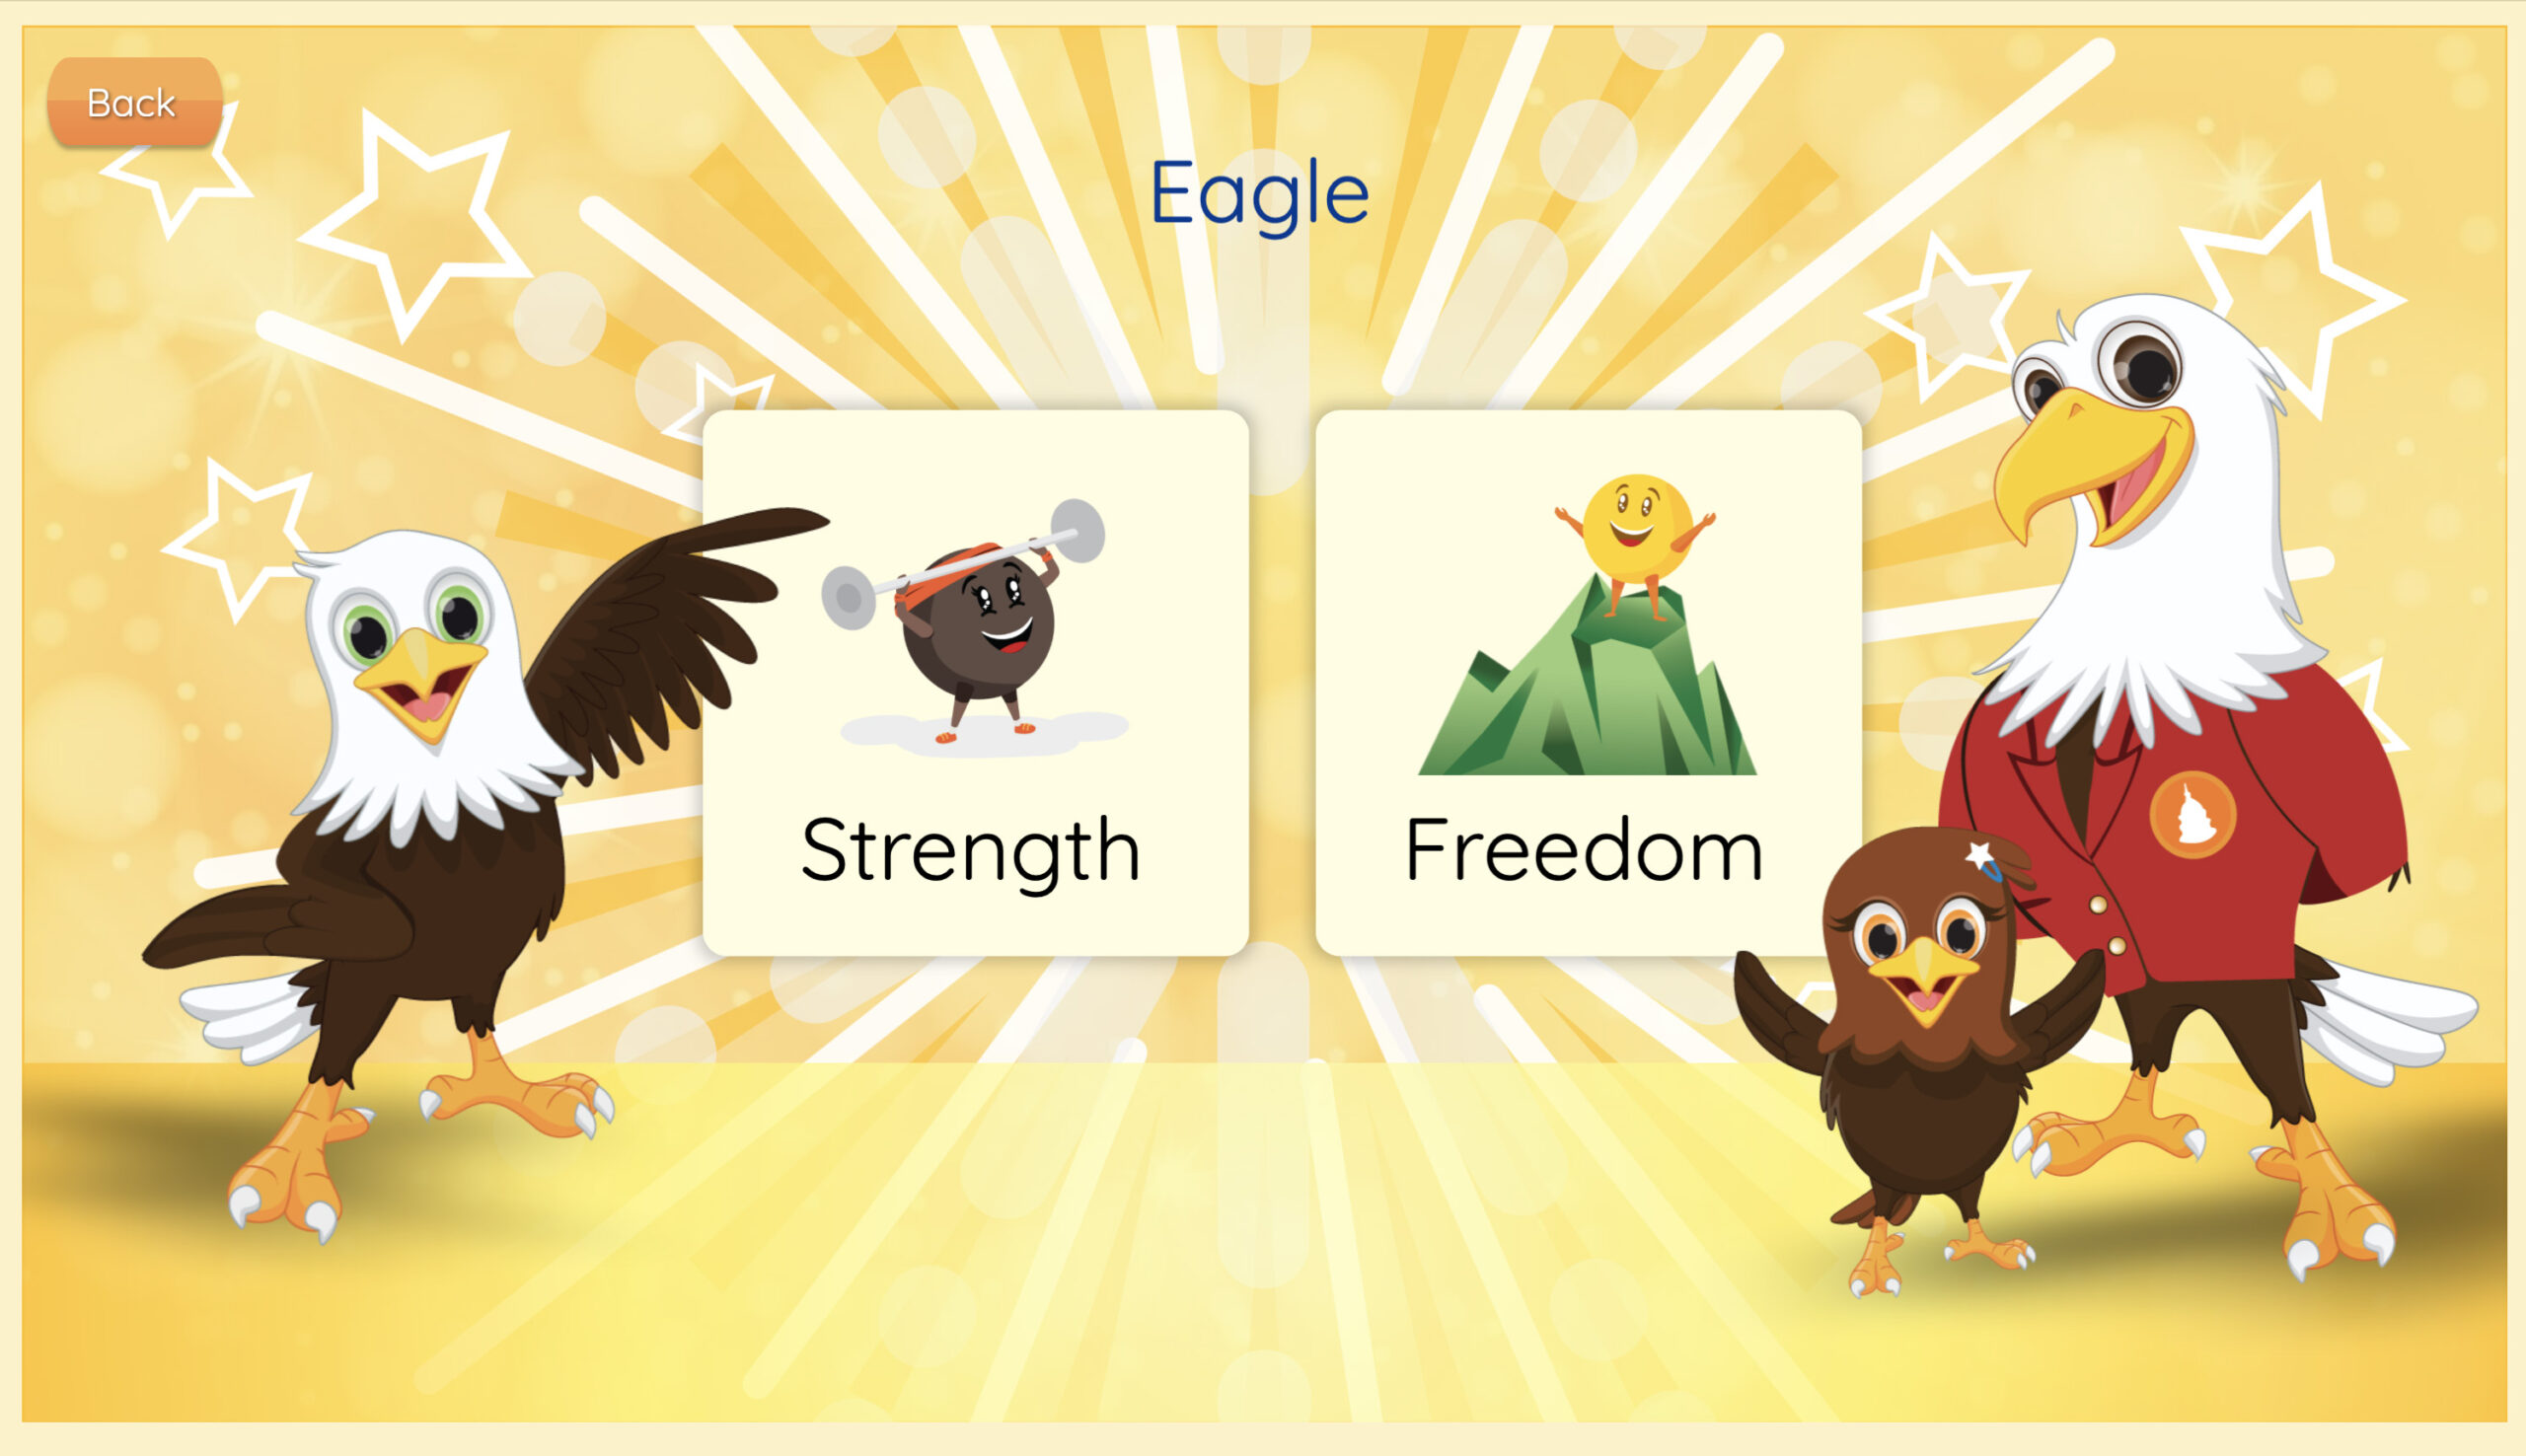 Discover Capitol Symbols - Congressional Seal - Eagle Symbol Meaning